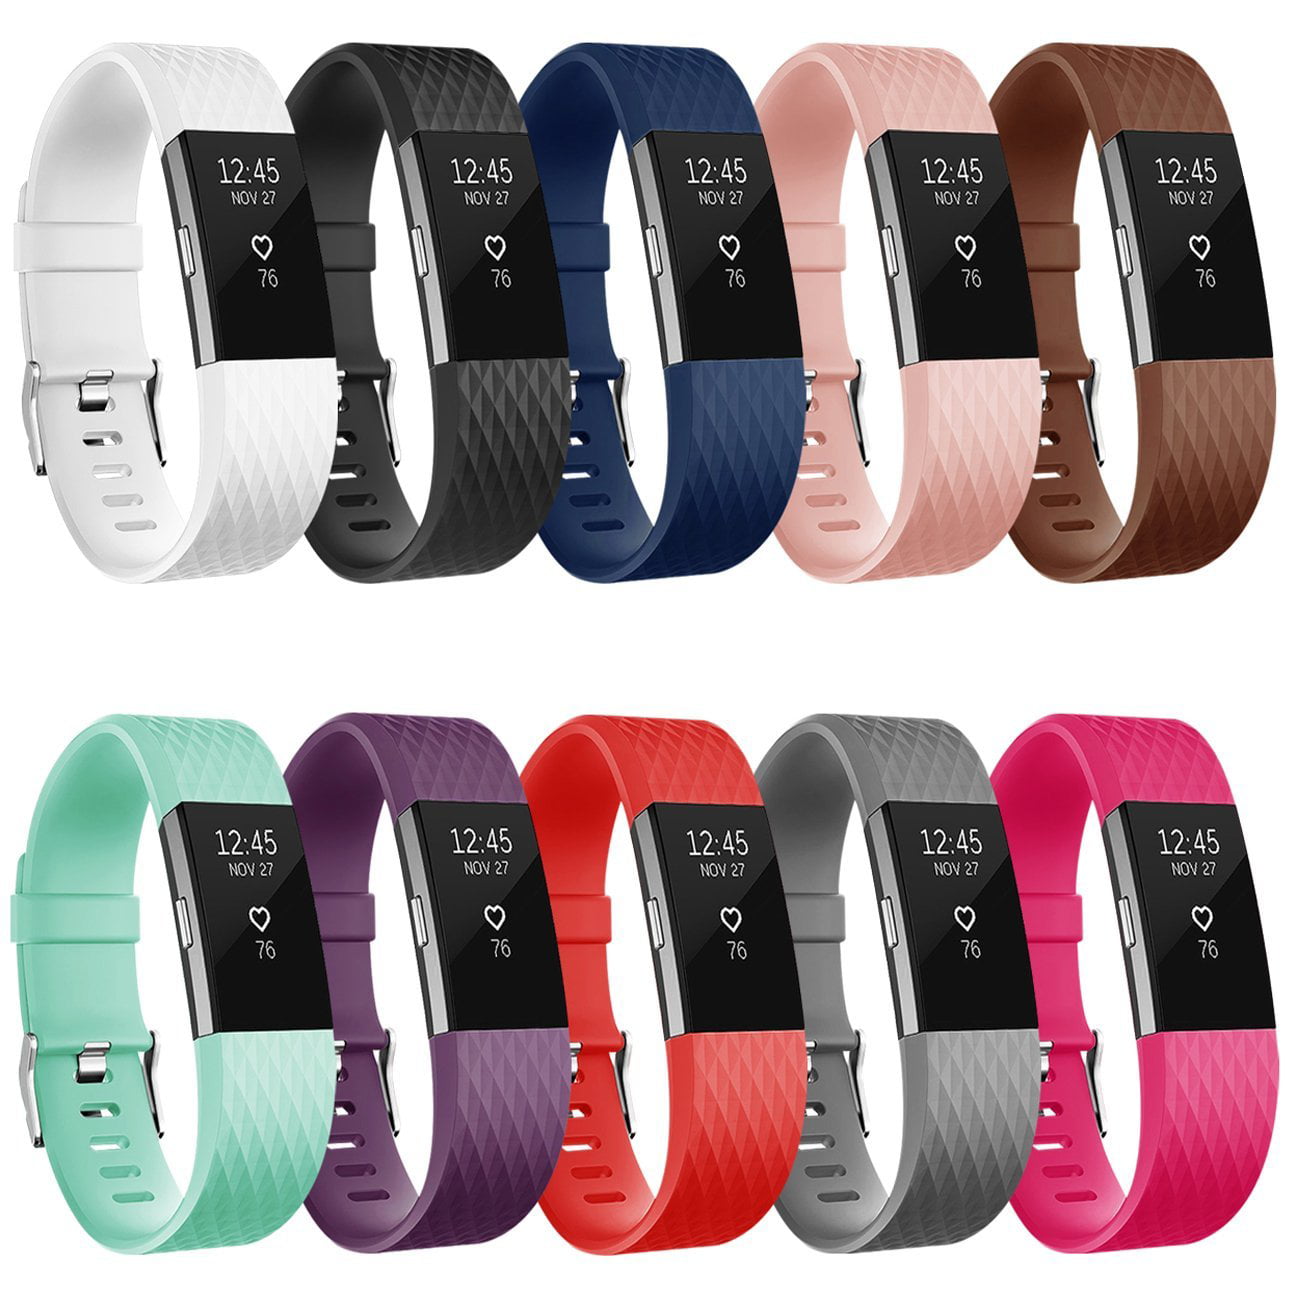 10 Pack Replacement Wristband For Fitbit Charge 2 Band Silicone Fitness Large US 